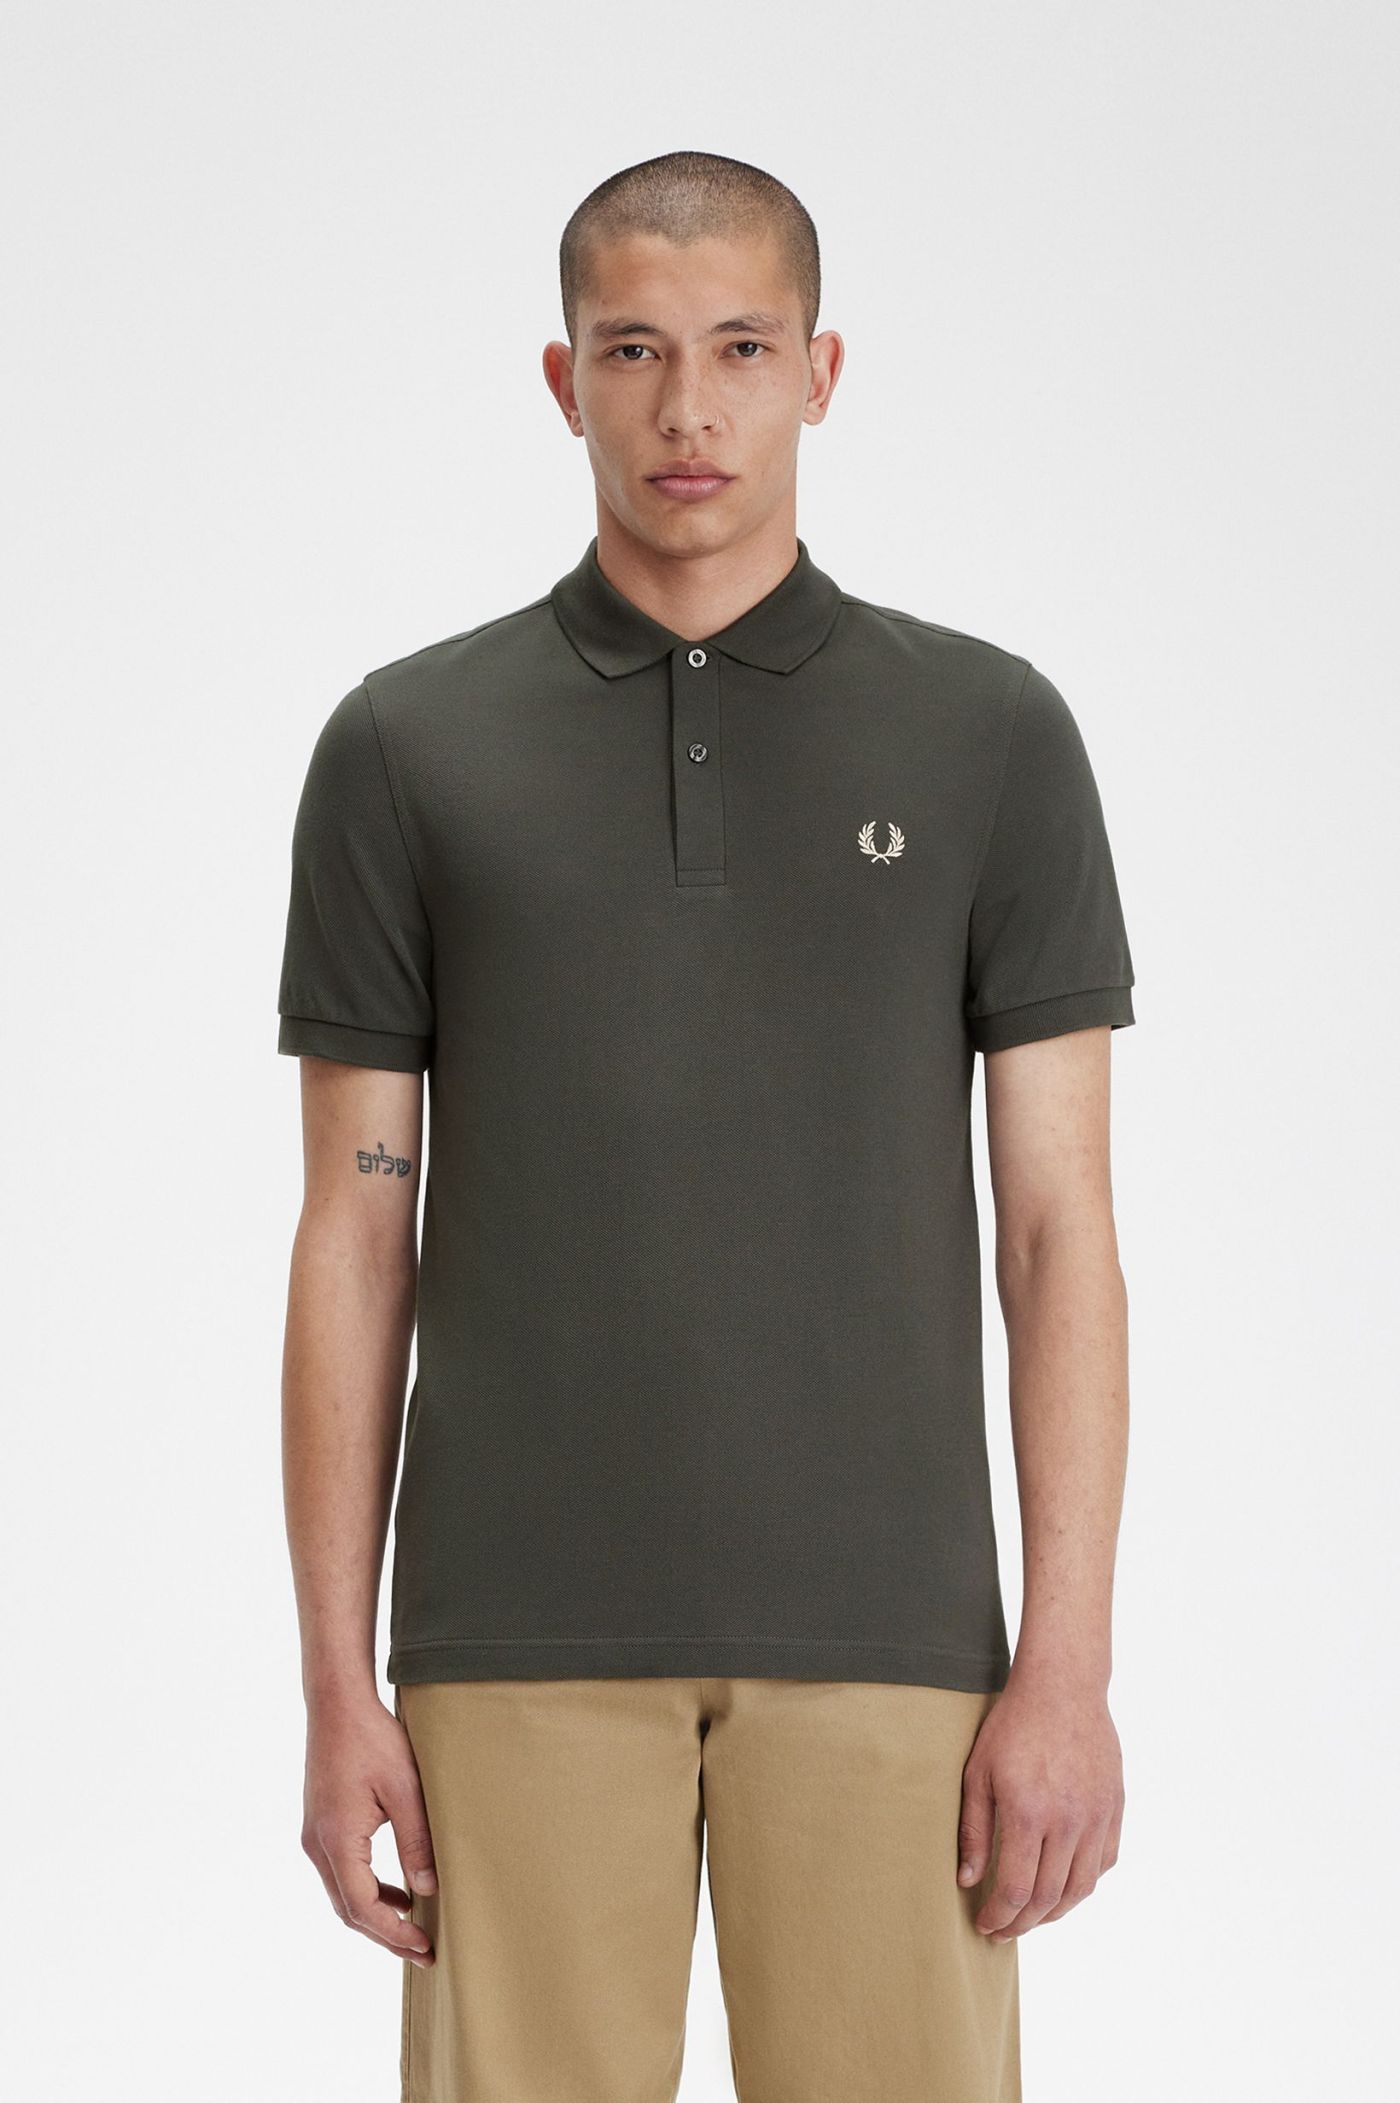 M6000 - Field Green / Oatmeal | The Fred Perry Shirt | Men's Short ...